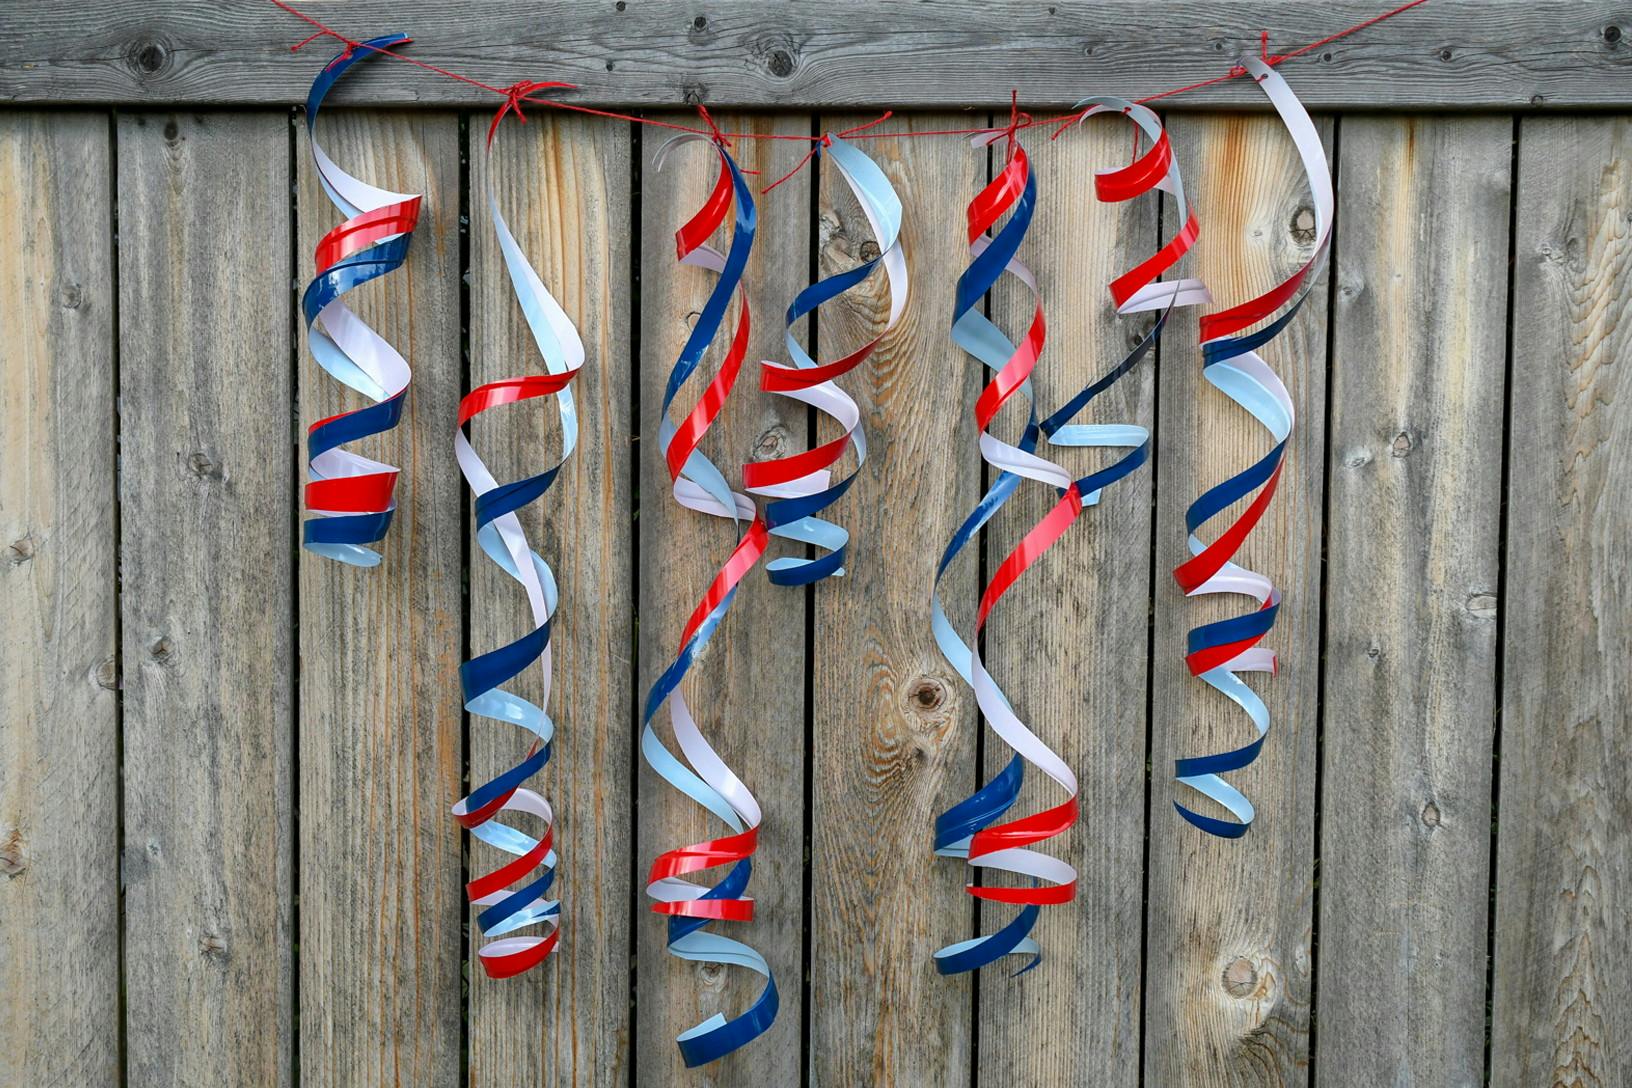 Twirly streamers hung together as a banner made from spiral-cut red and blue plastic cups, hanging on a wooden fence.